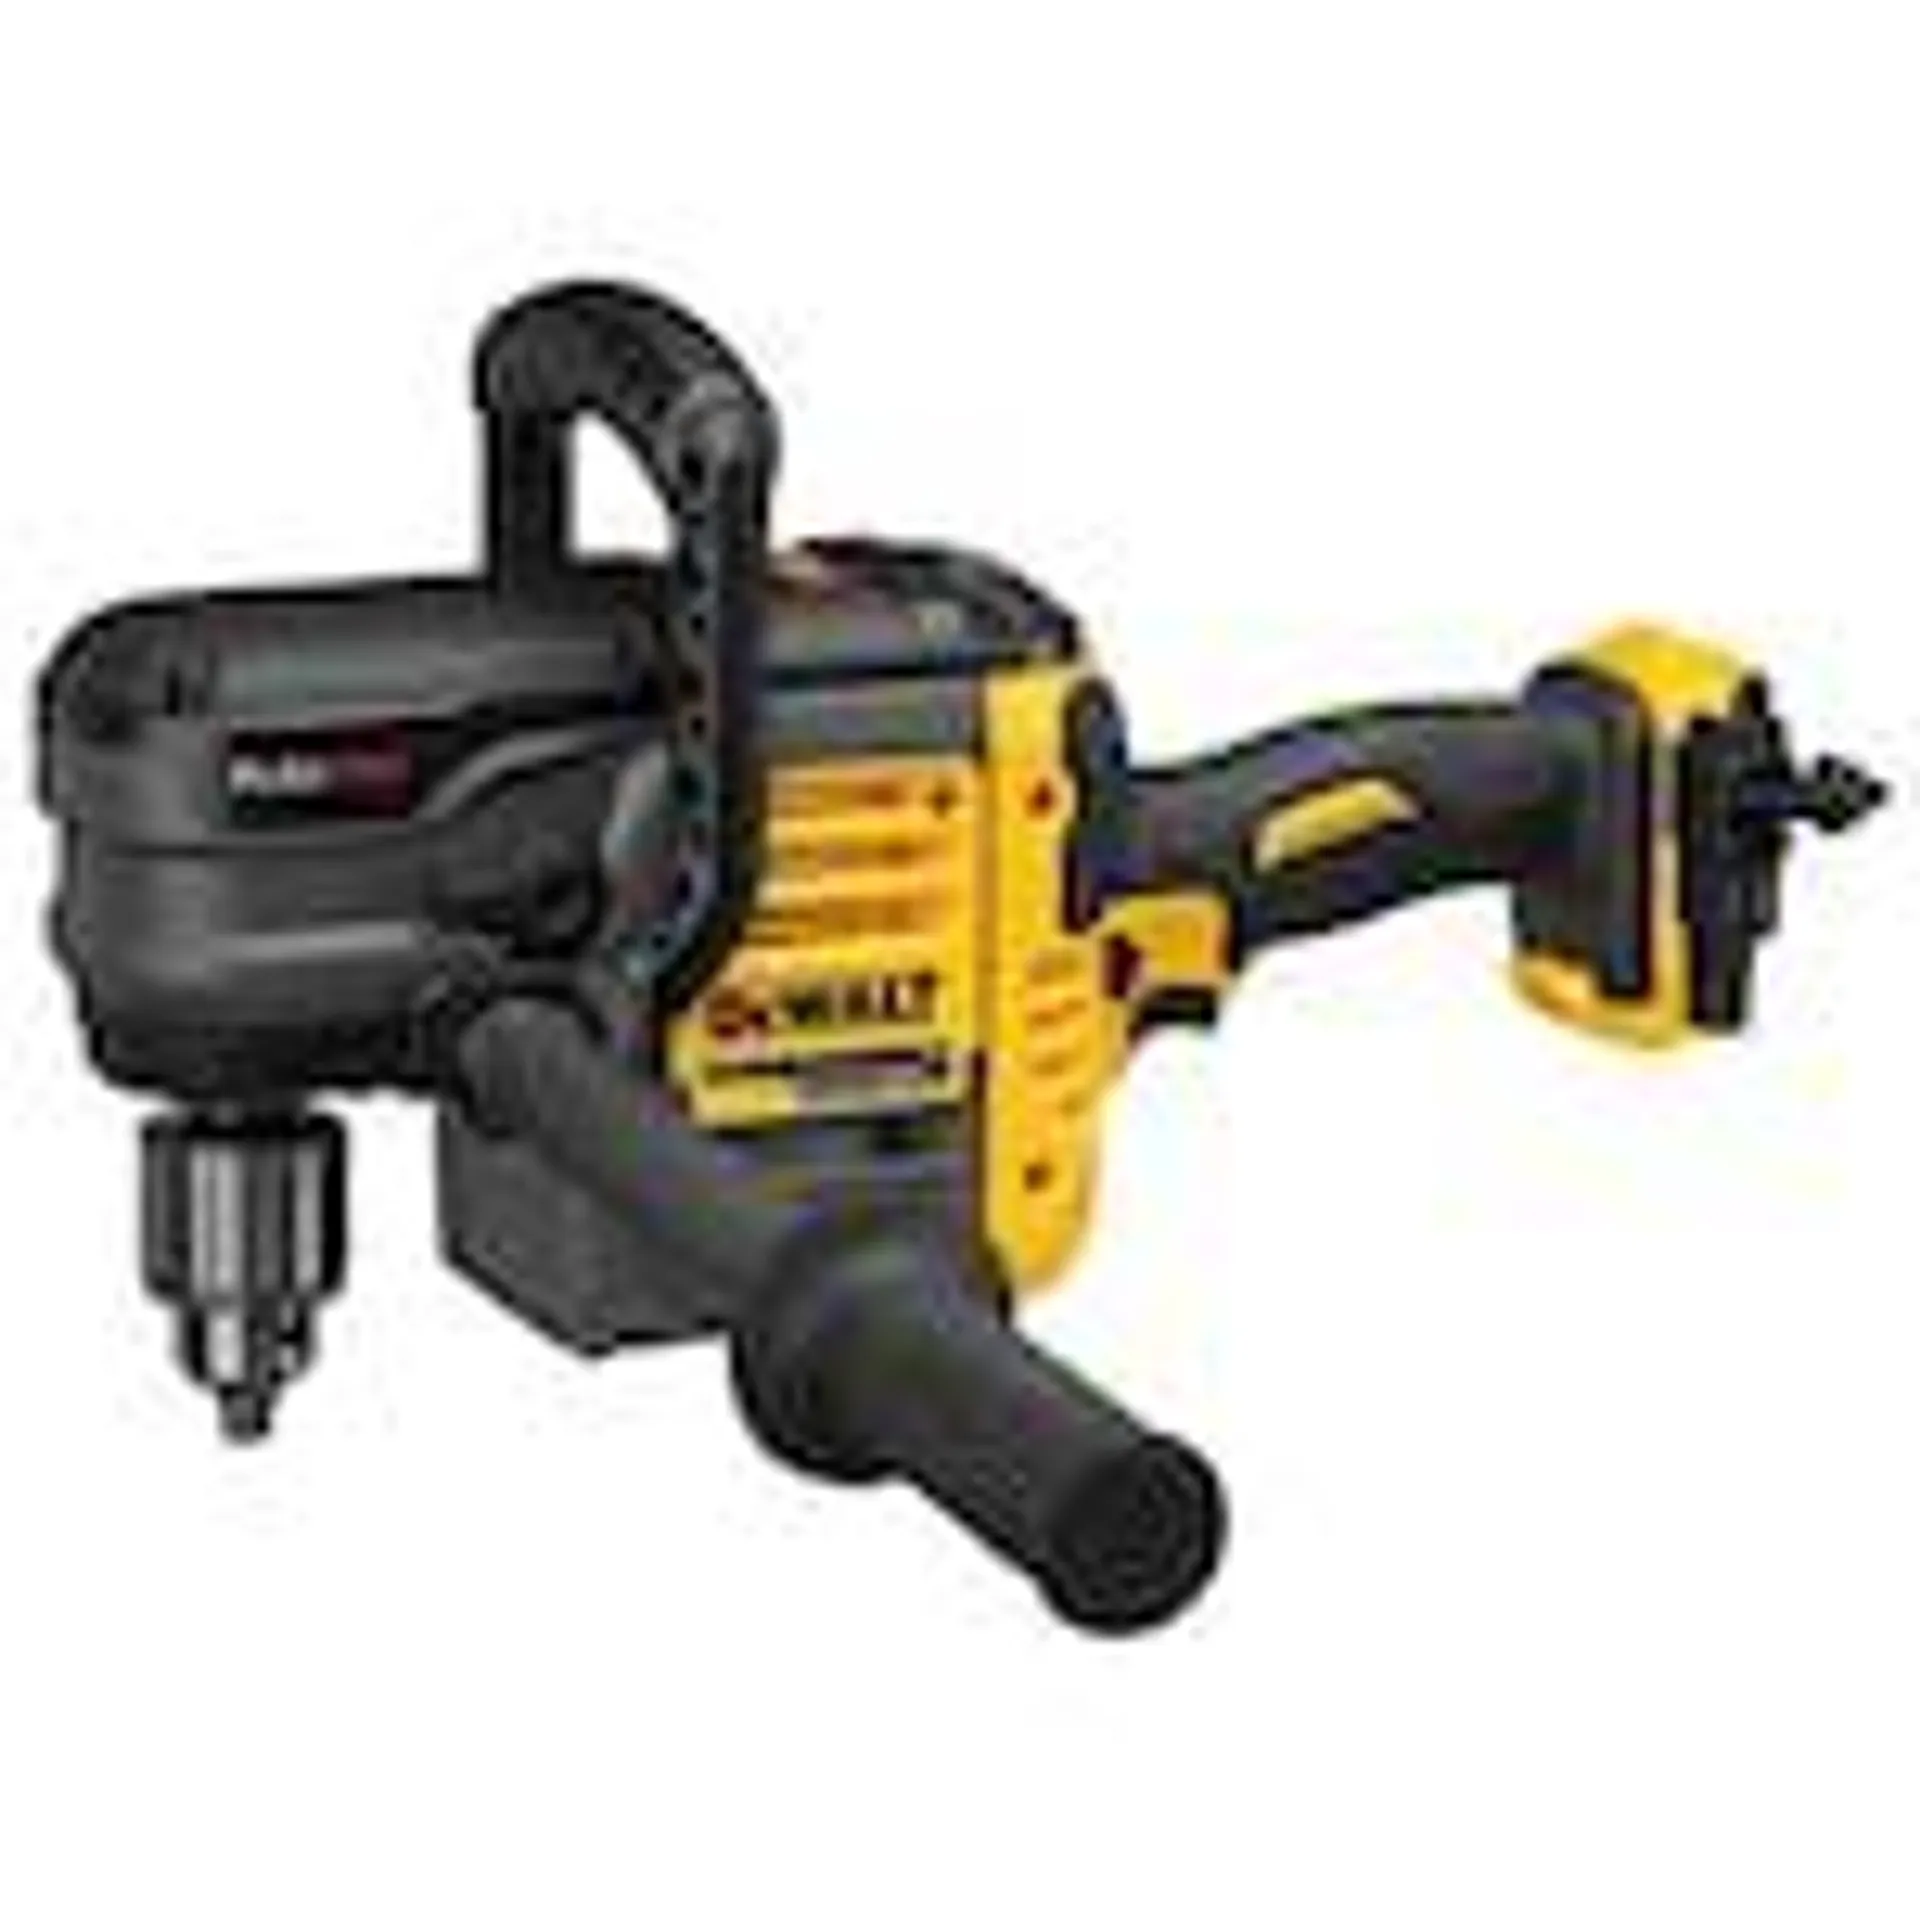 60V MAX FLEXVOLT Lithium-Ion Cordless Brushless 1/2-inch VSR Stud and Joist Drill Kit with E-Clutch System, (2) 6Ah Batteries, Charger and Bag